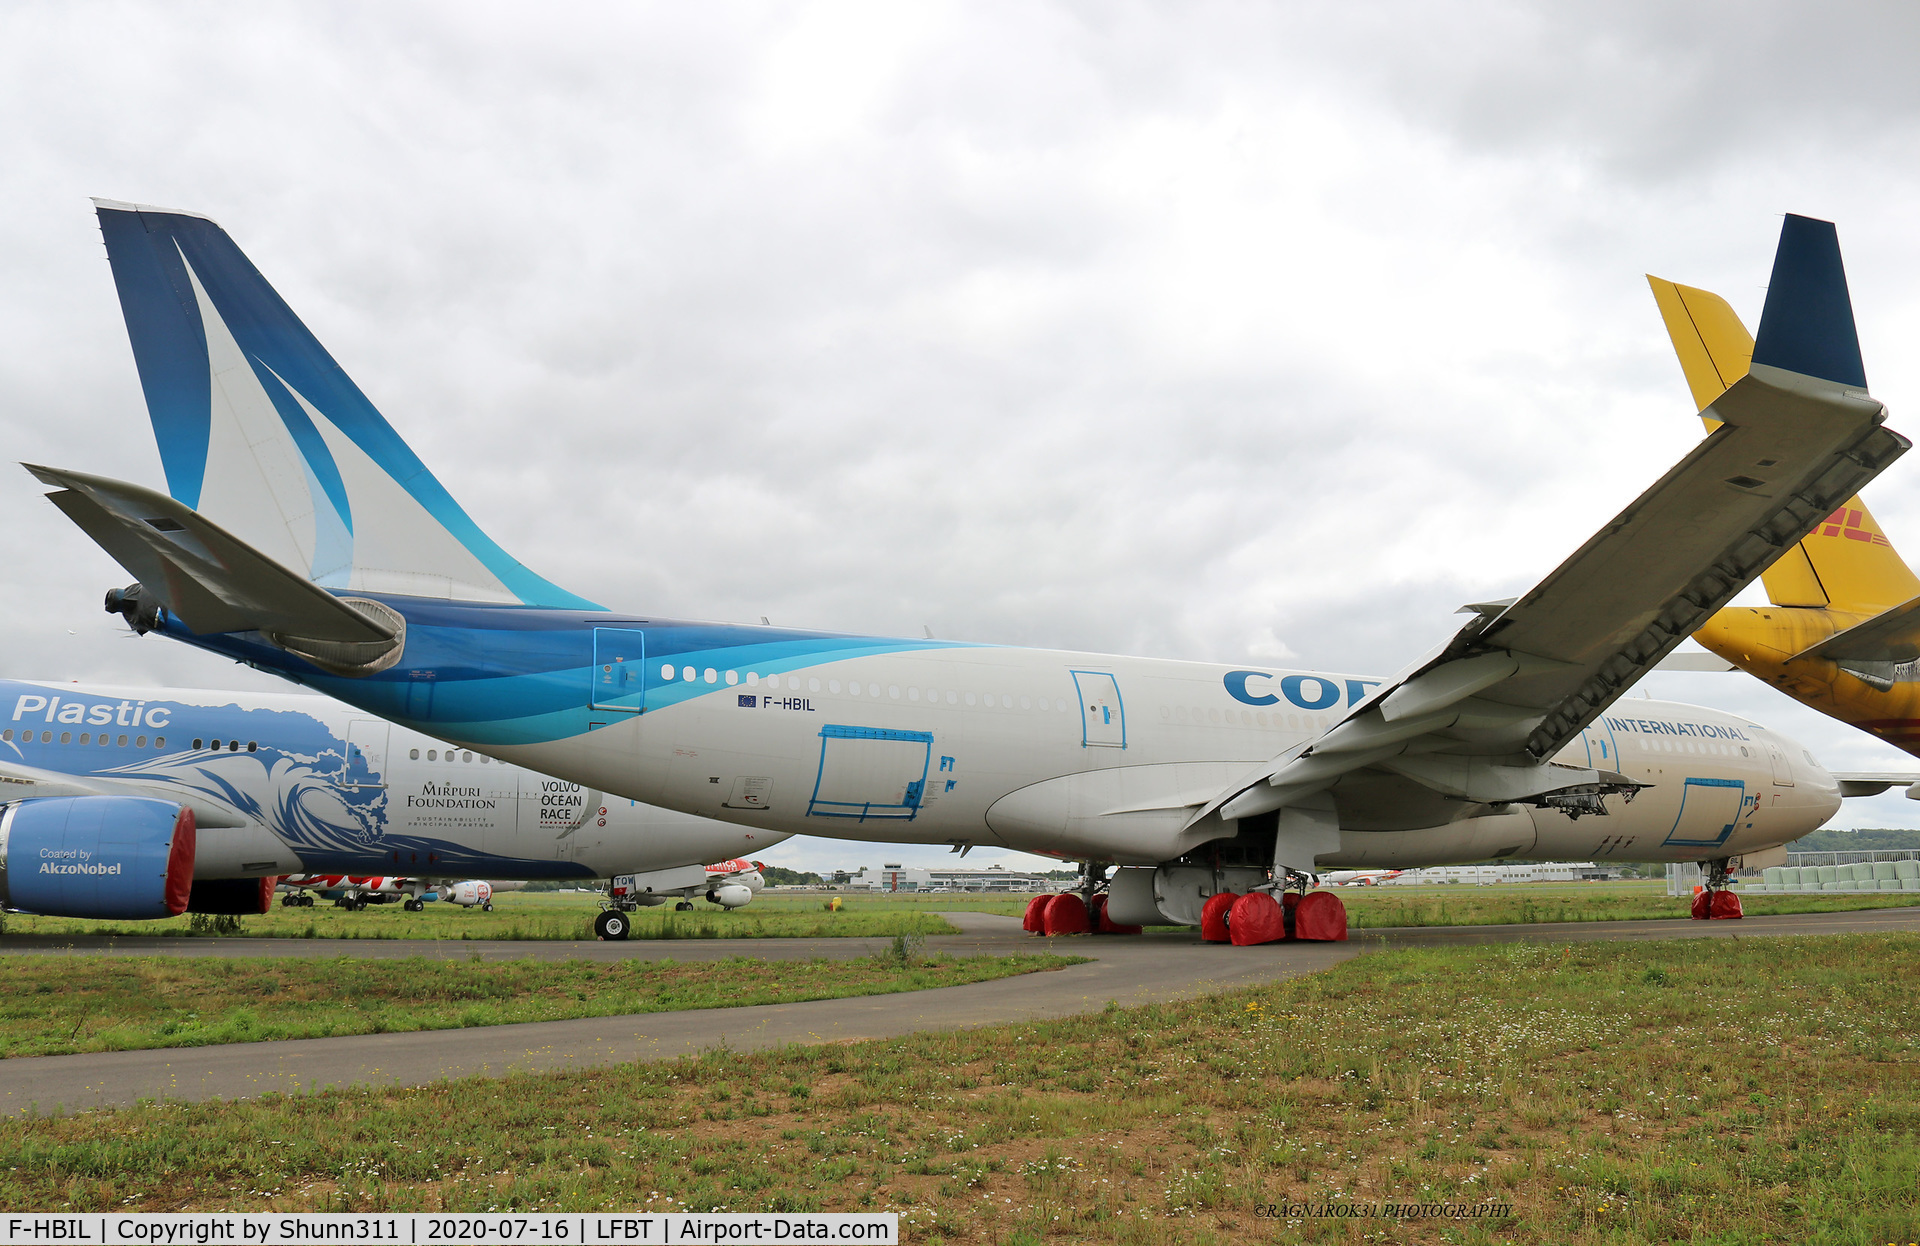 F-HBIL, 2000 Airbus A330-243 C/N 320, Stored @LDE without engines... to be scrapped...